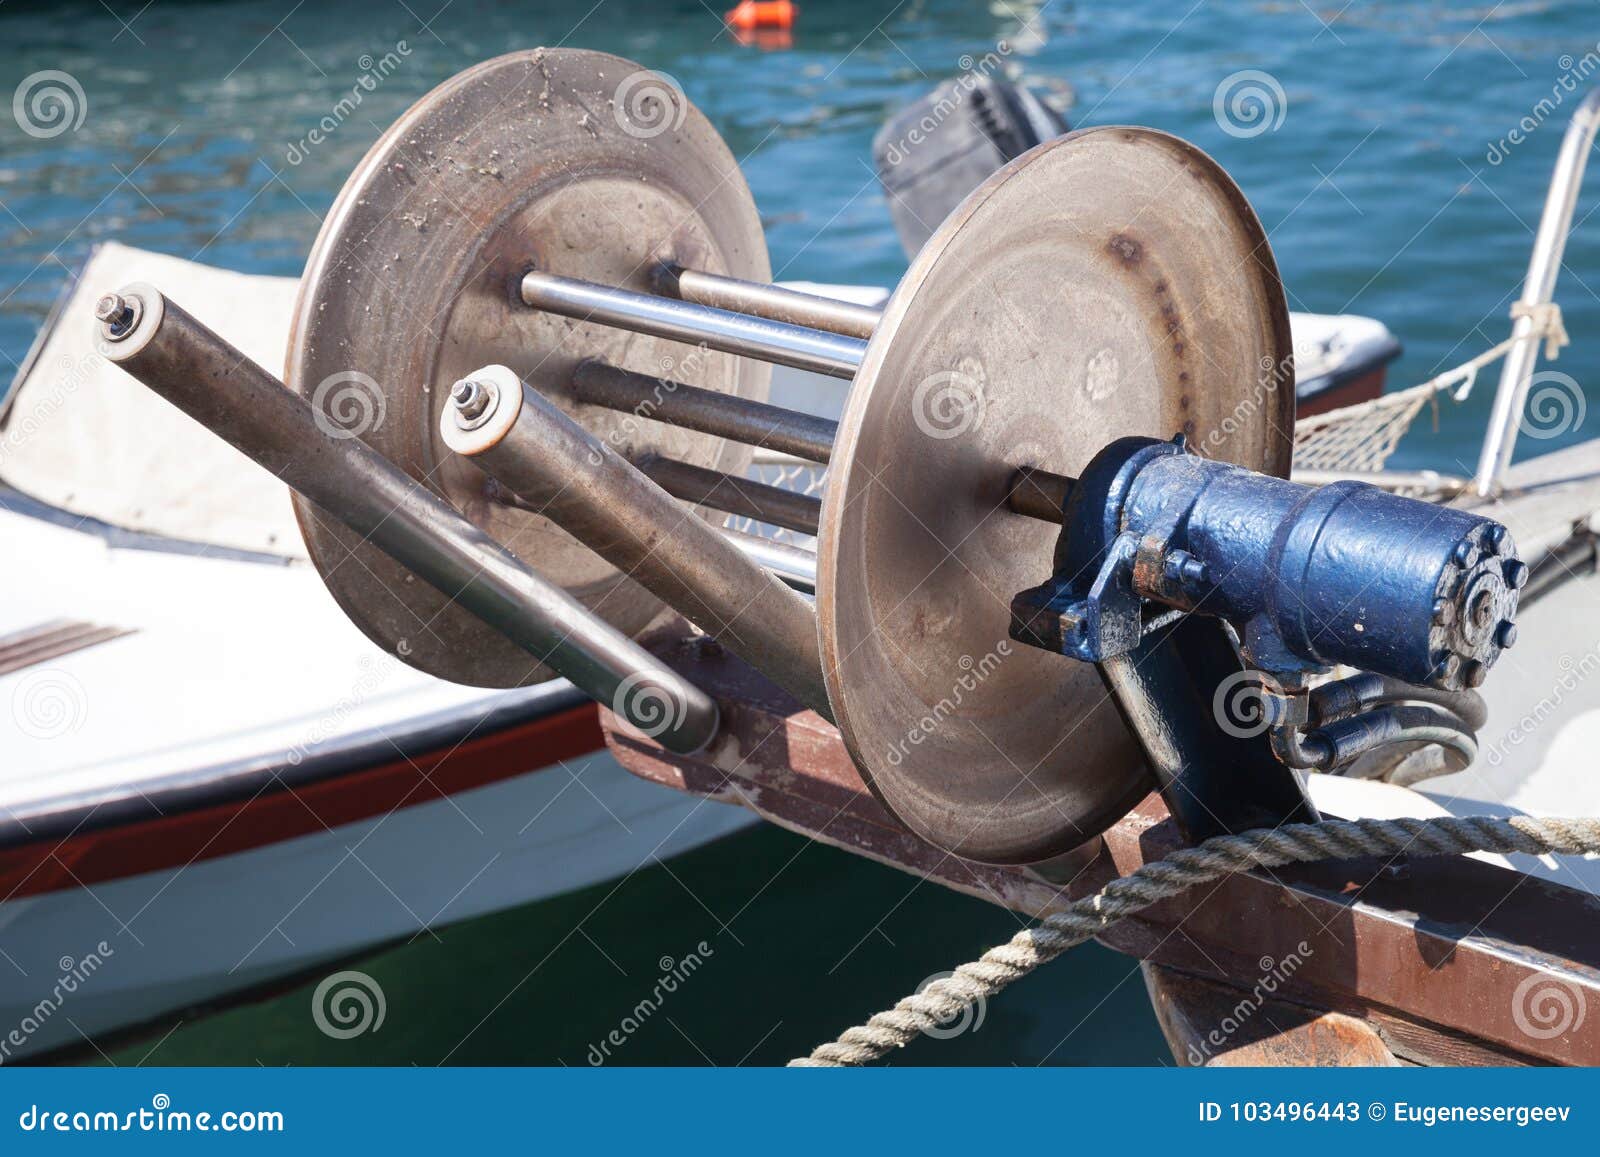 Bow Winch for Fishing Net, Small Boat Part Stock Image - Image of